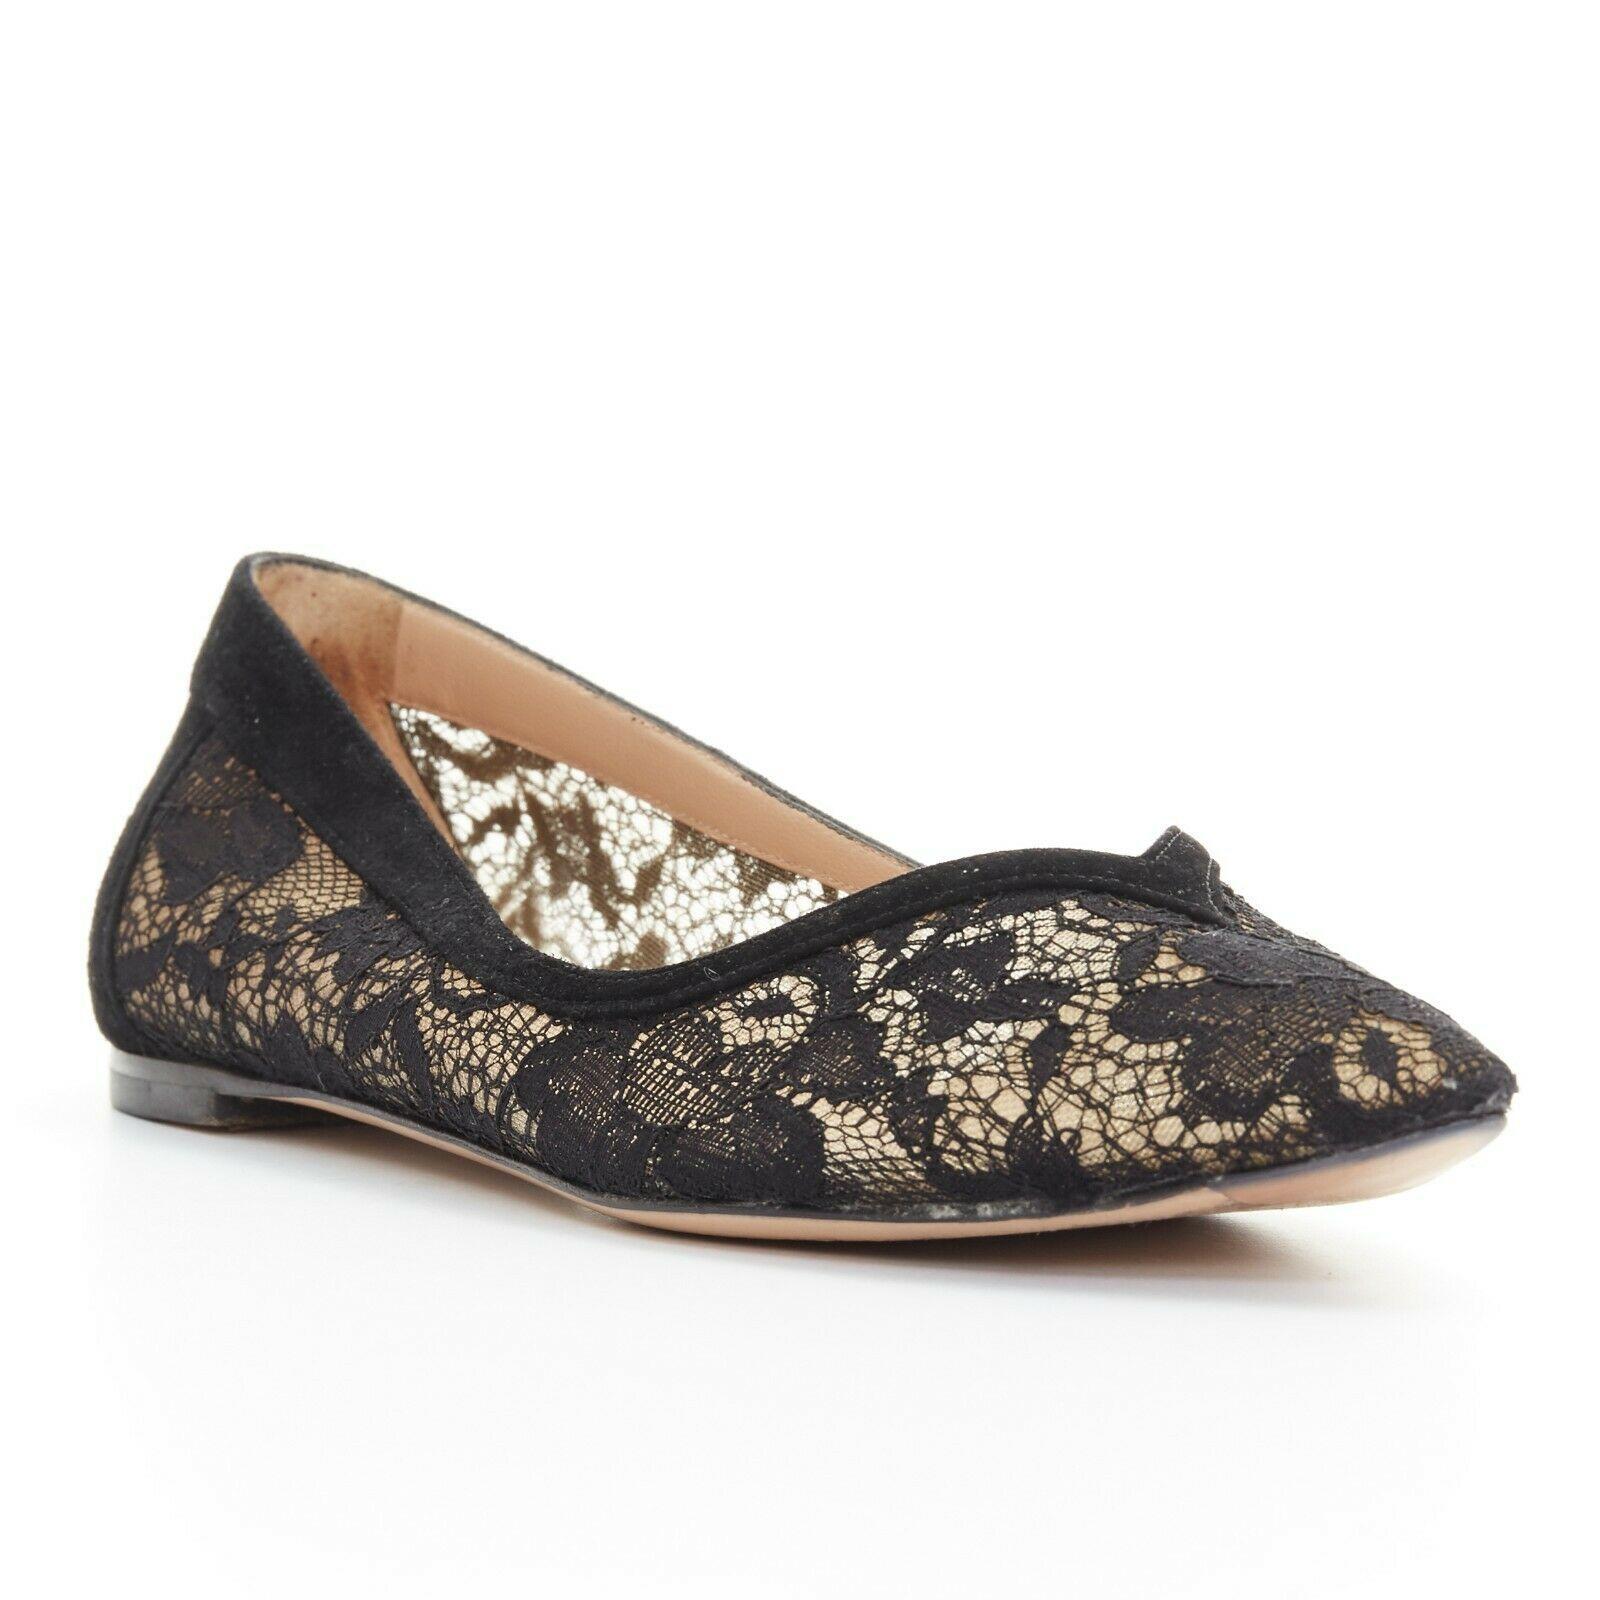 GIANVITO ROSSI black floral lace suede trimmed V-neck ballet flats EU36.5
GIANVITO ROSSI
Black floral lace upper. 
Suede trimming along opneing. 
V-neck. 
Pointed toe. 
Stacked wooden heel. 
Ballet flats. 
Made in Italy.

CONDITION:
Very good, this